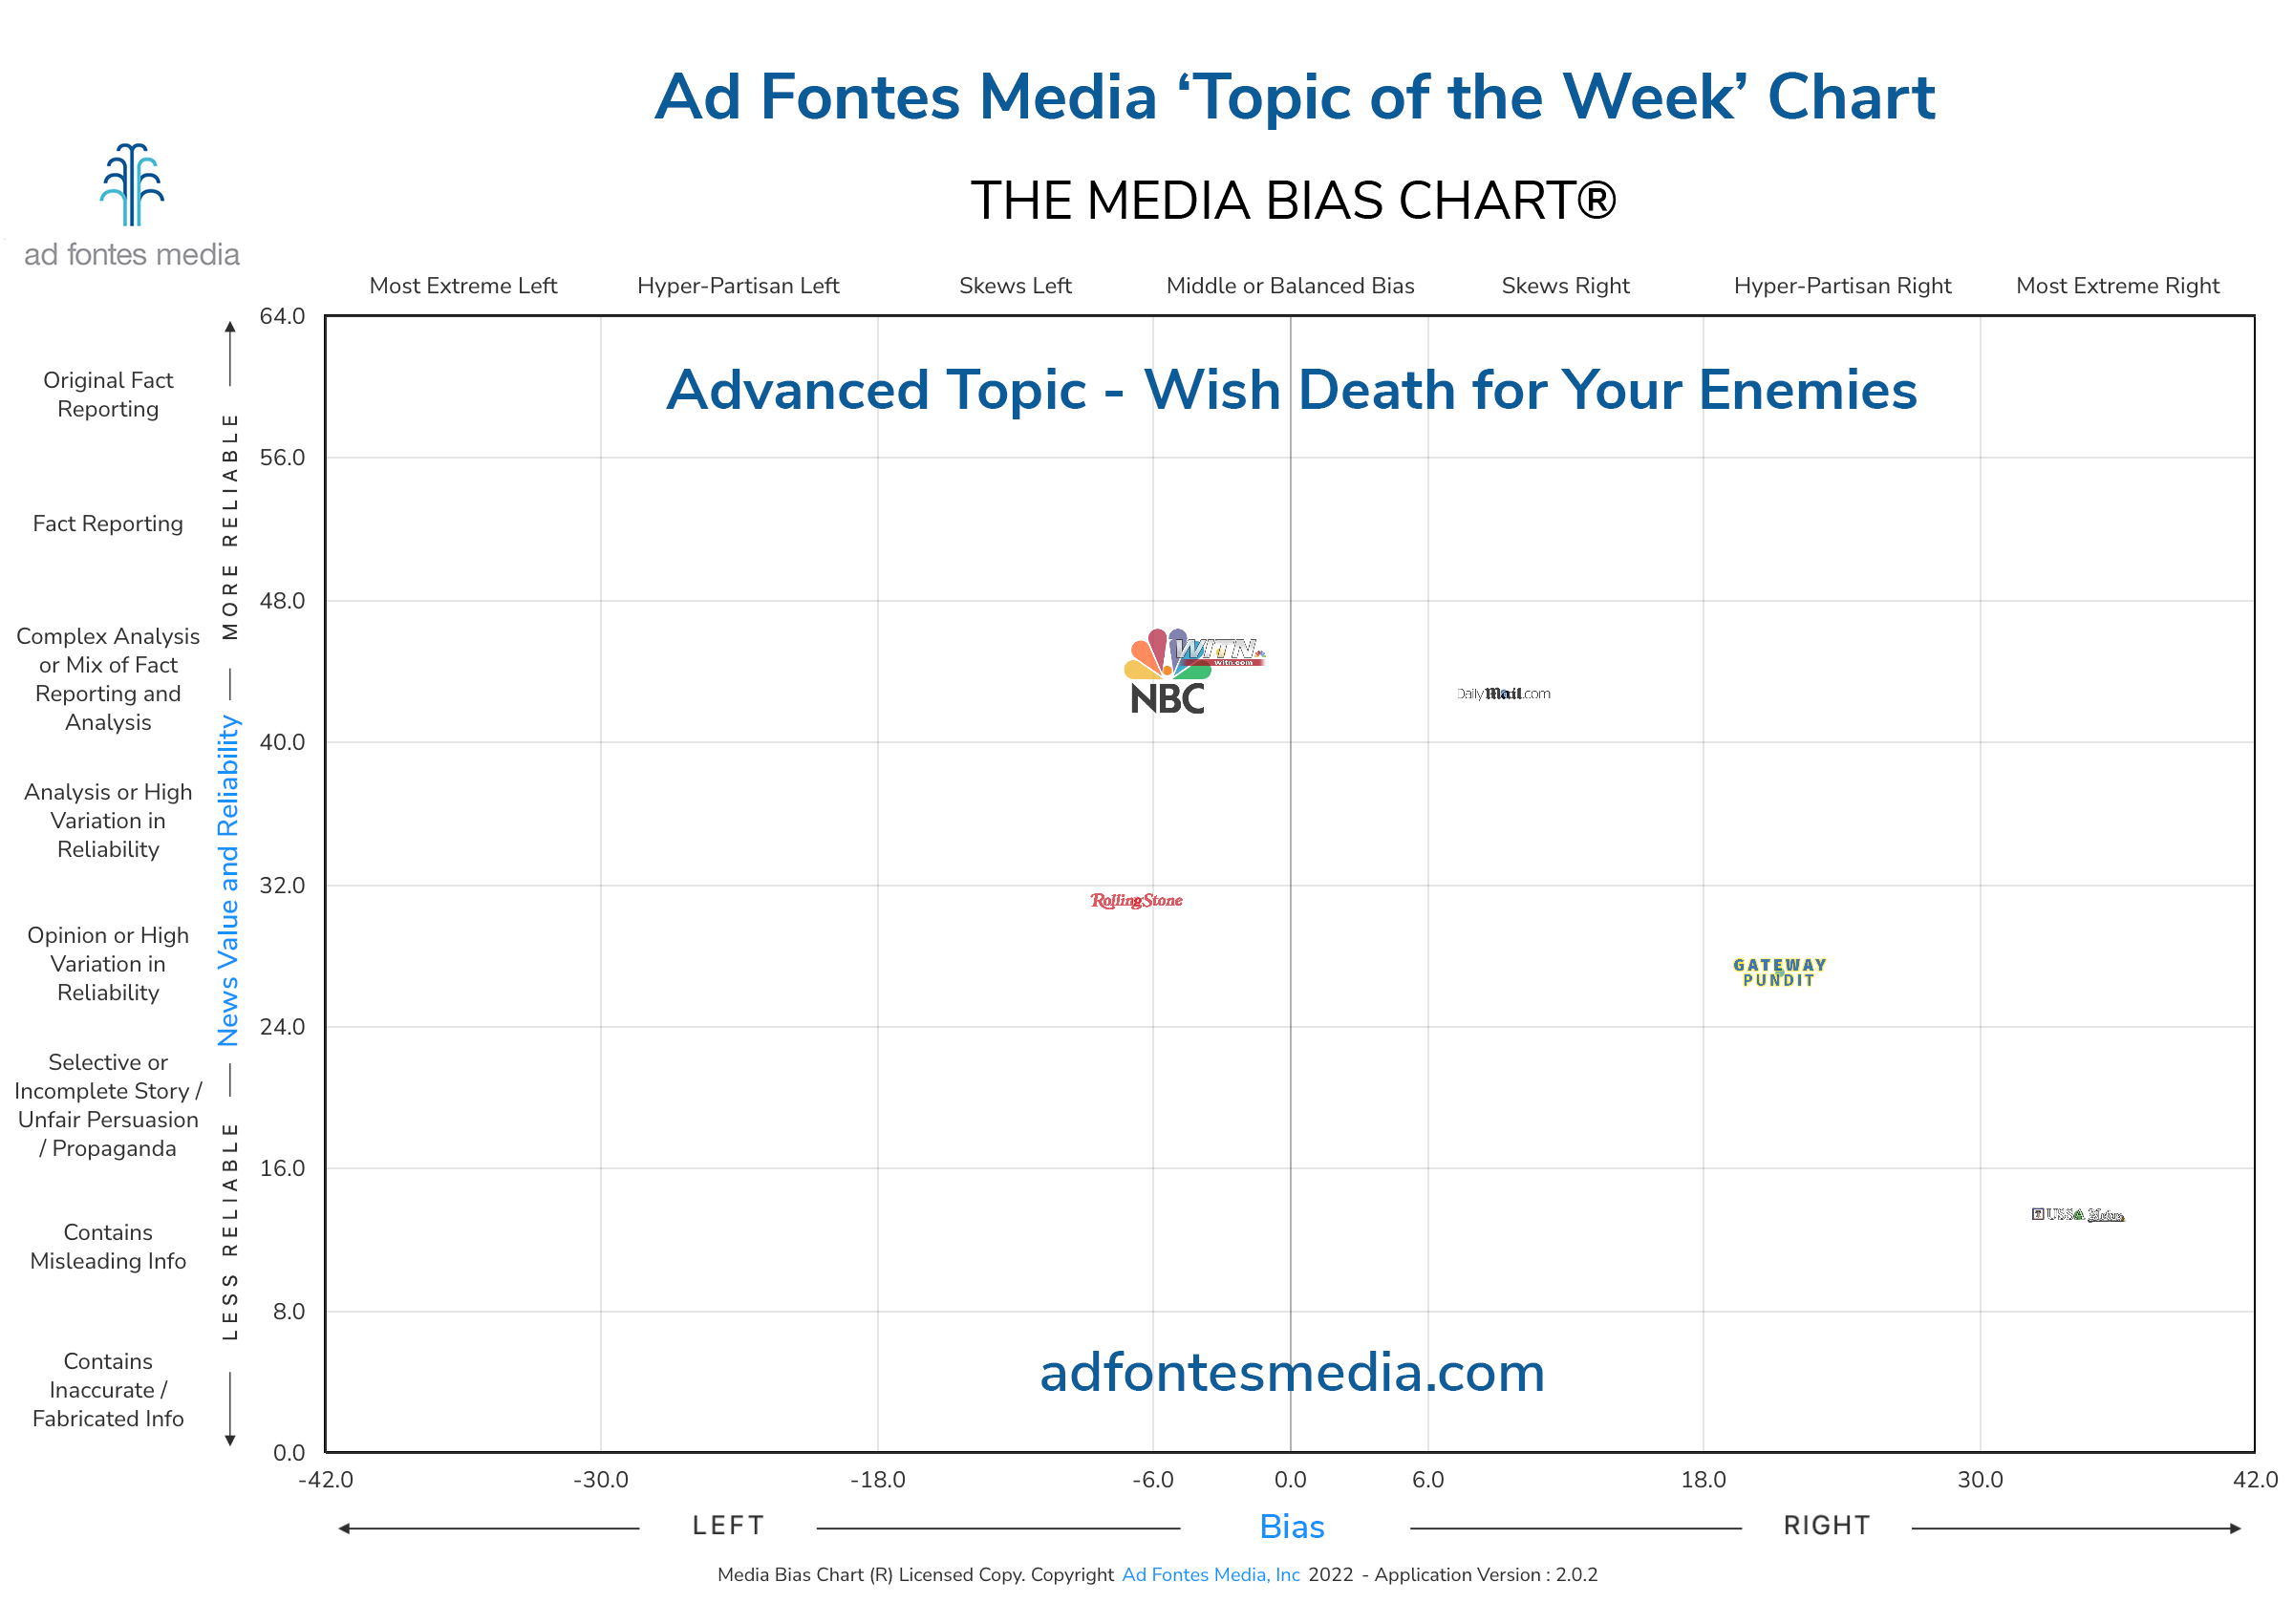 Scores for the Wish Death for Your Enemies articles on the chart